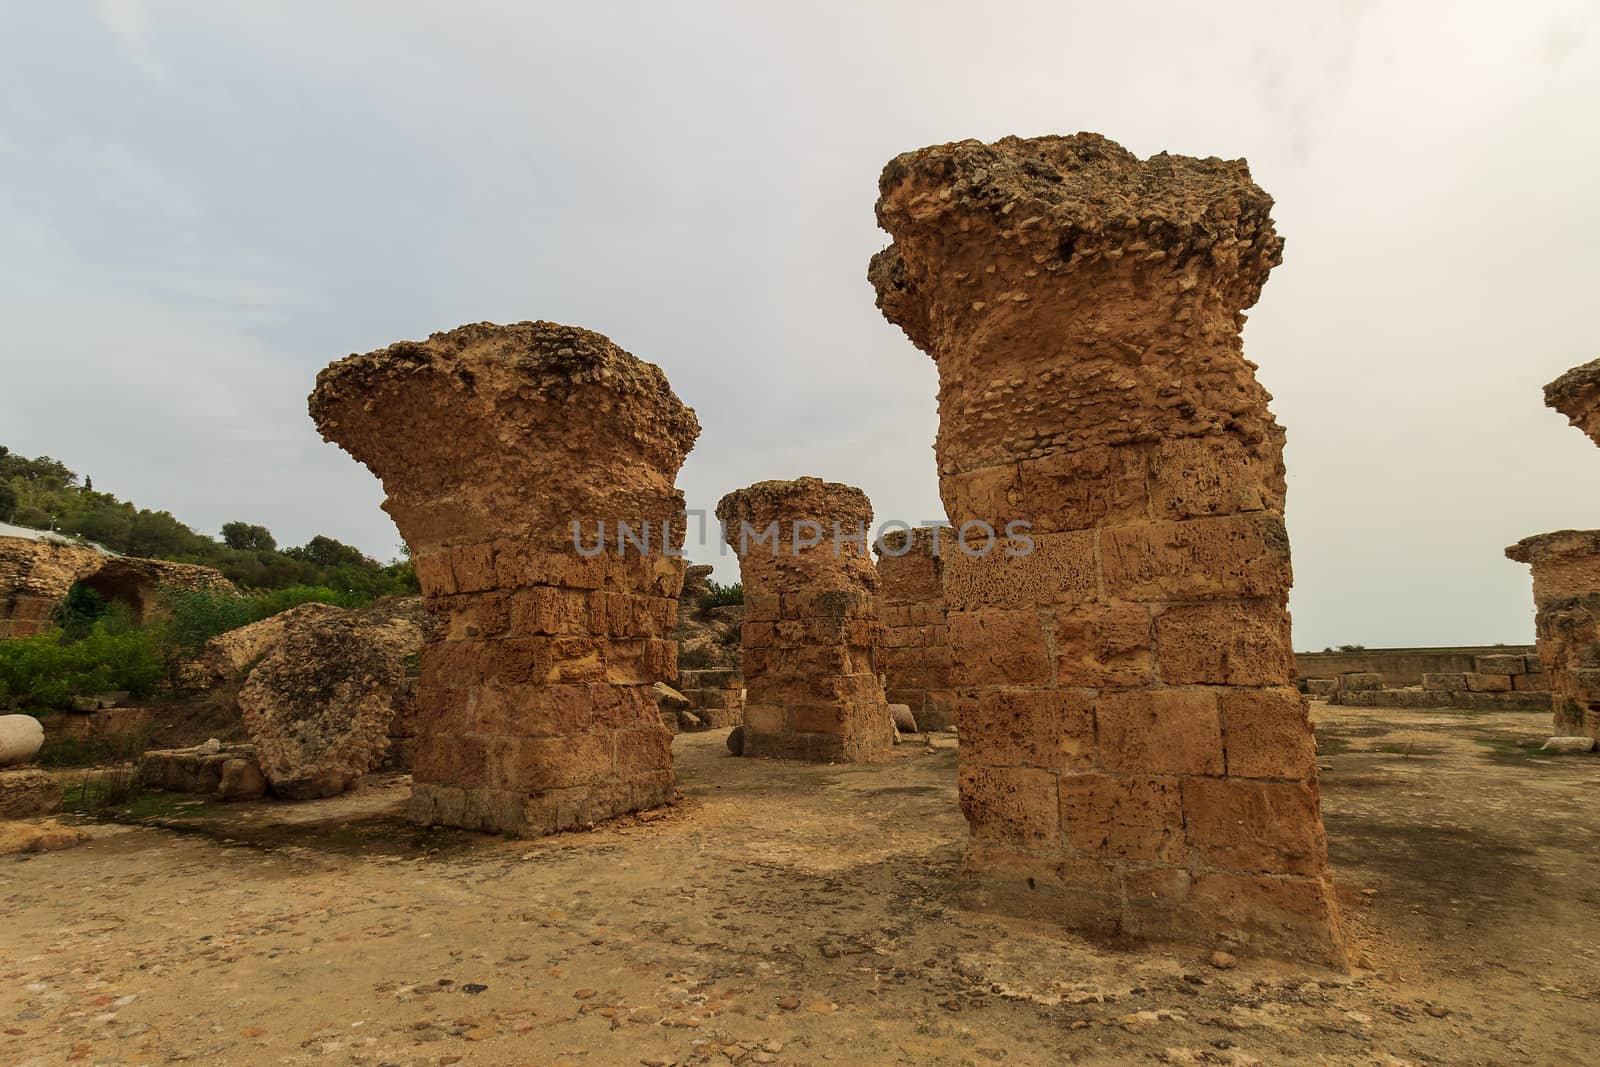 Ancient ruins of baths at tunisia, Carthage. Anthony terms.